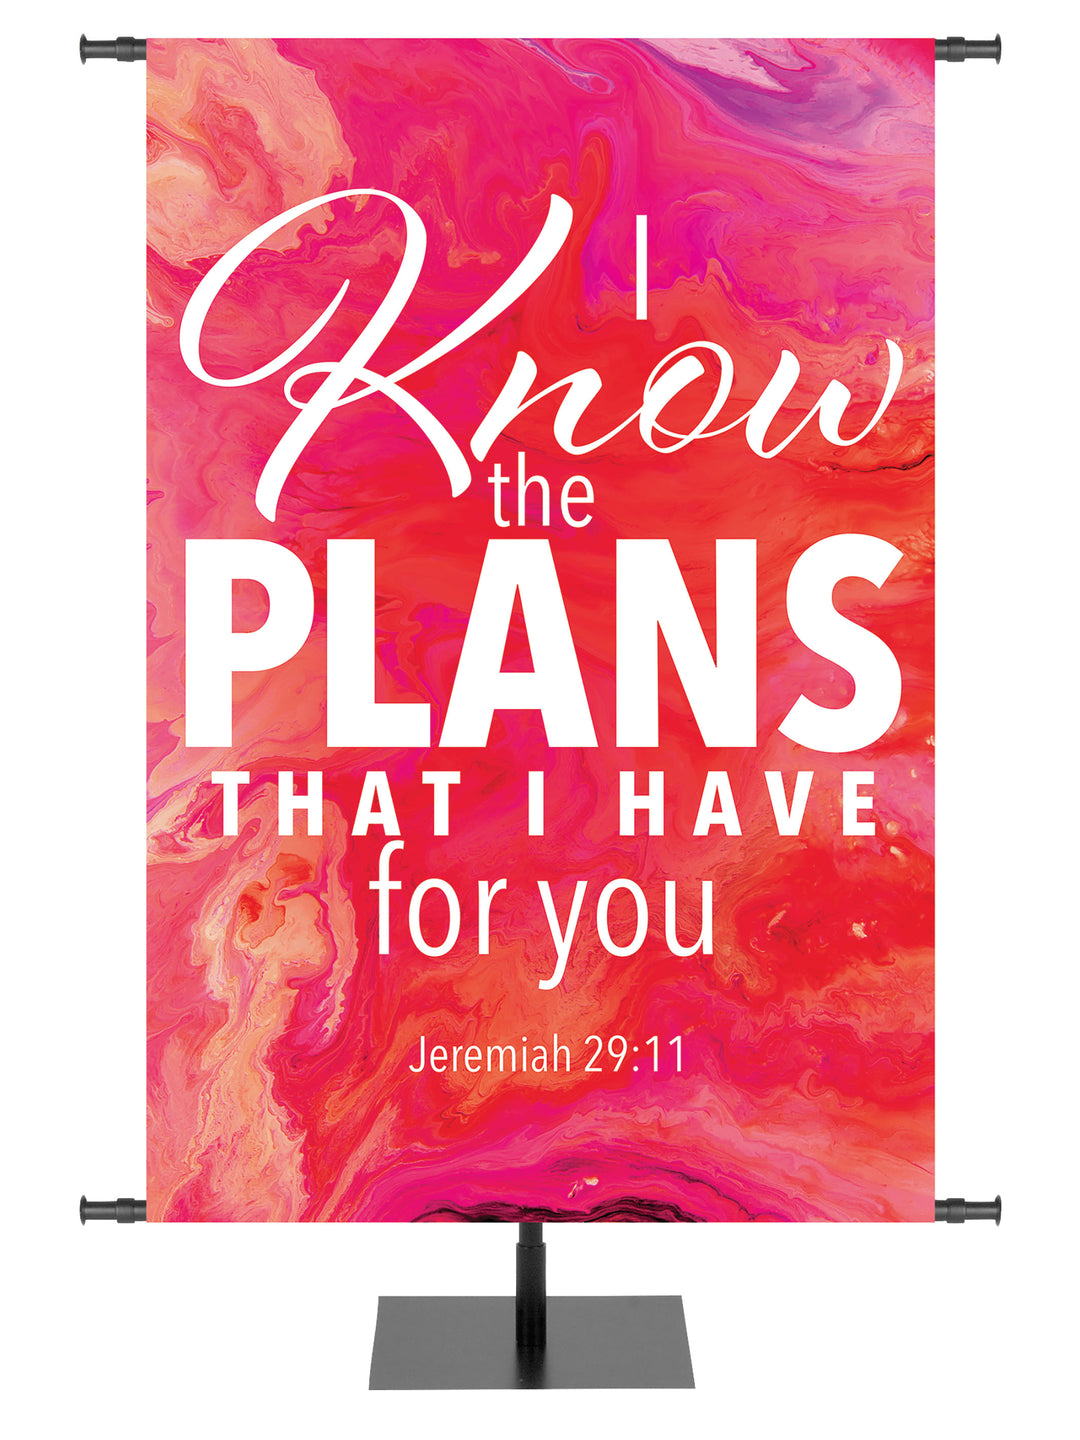 Church Gospel Impressions I Know The Plans That I Have For You. Jeremiah 25:11. In Blue, Purple, Red and Teal